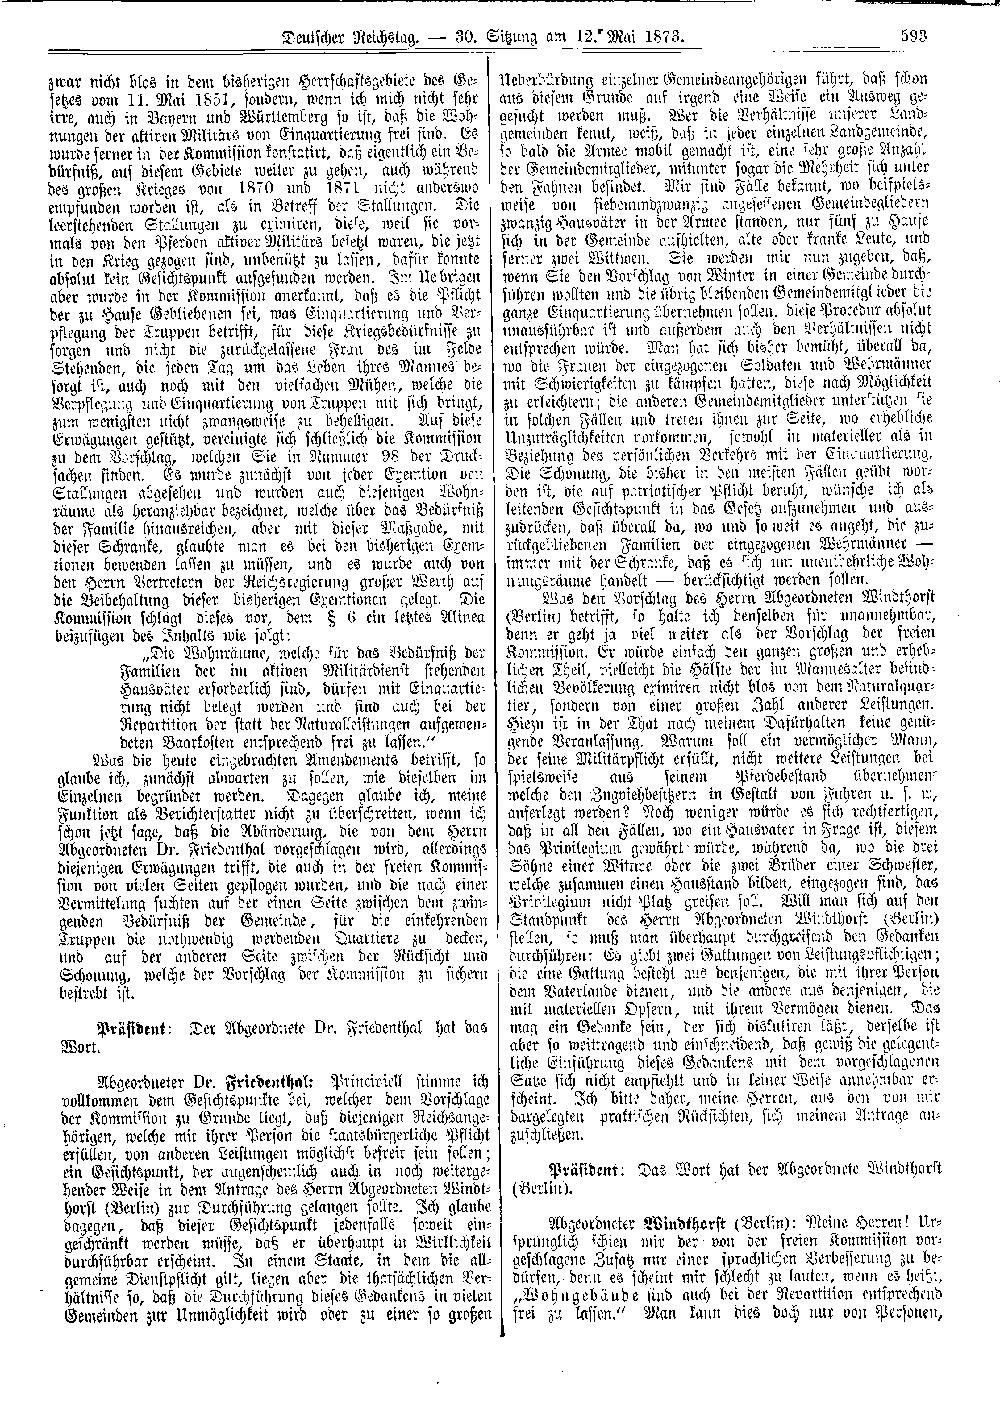 Scan of page 593